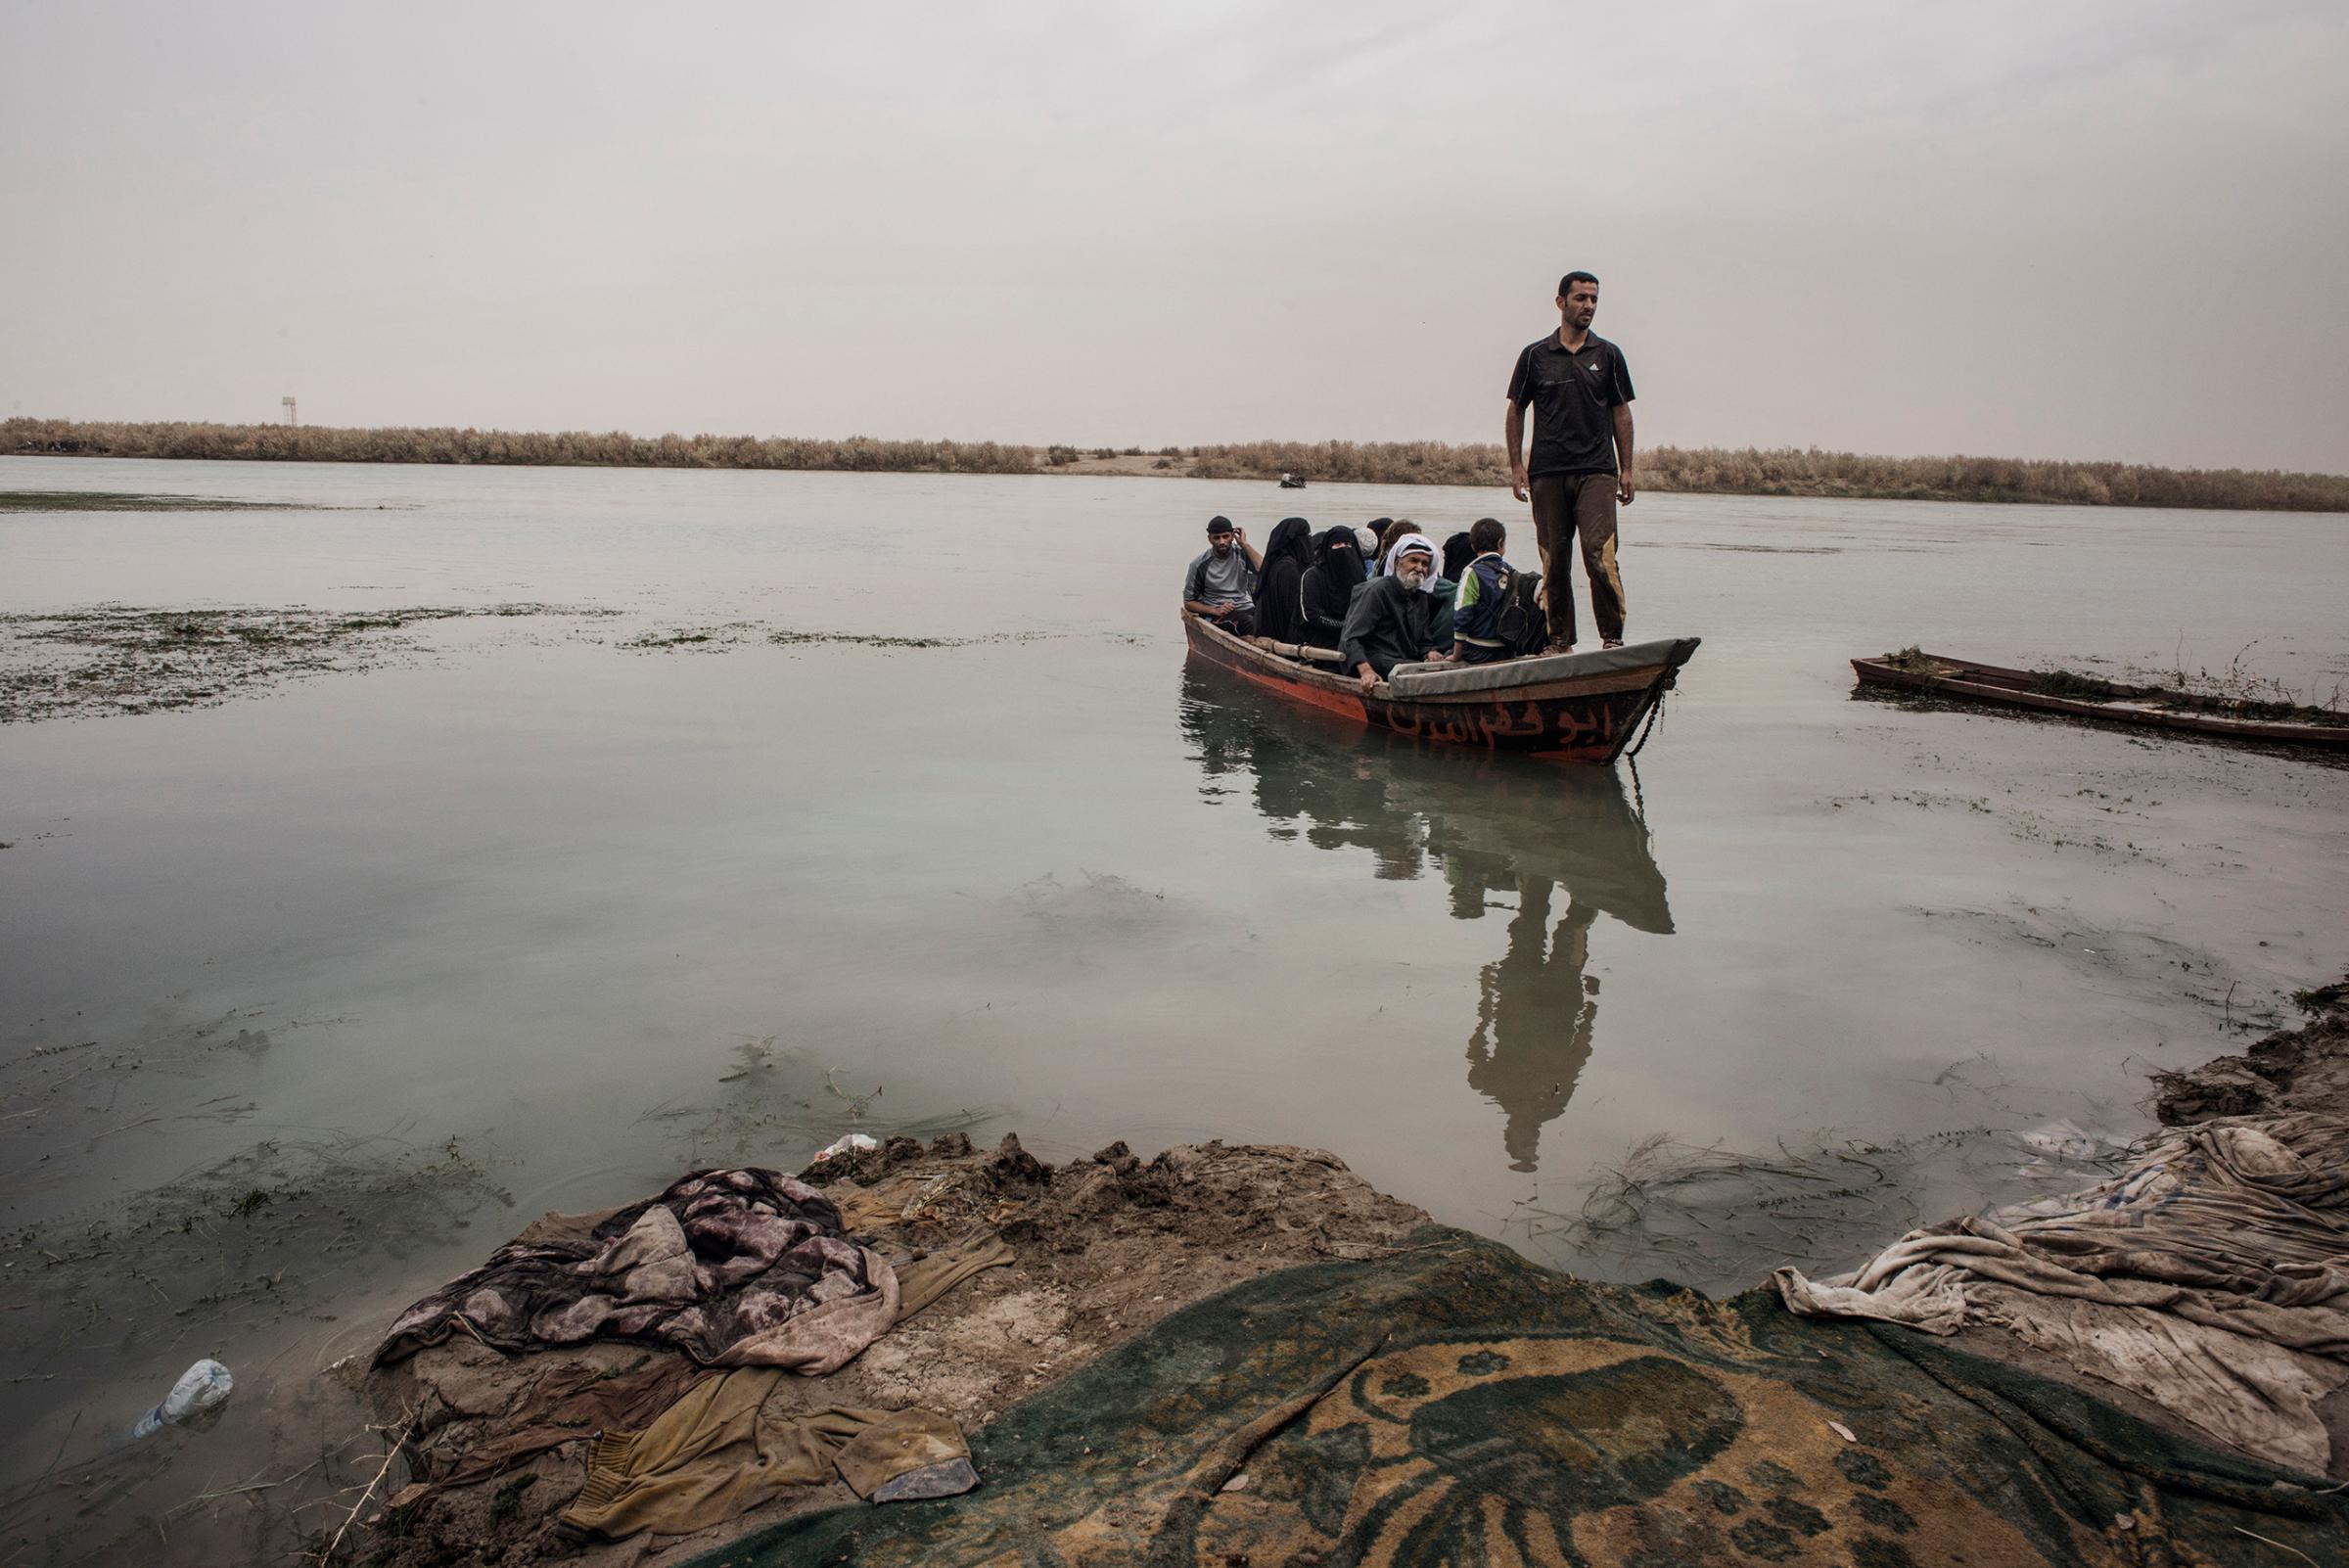 Families cross the Tigris River in northern Iraq to escape from ISIS during the Mosul offensive. Many others went by car, truck or on foot.